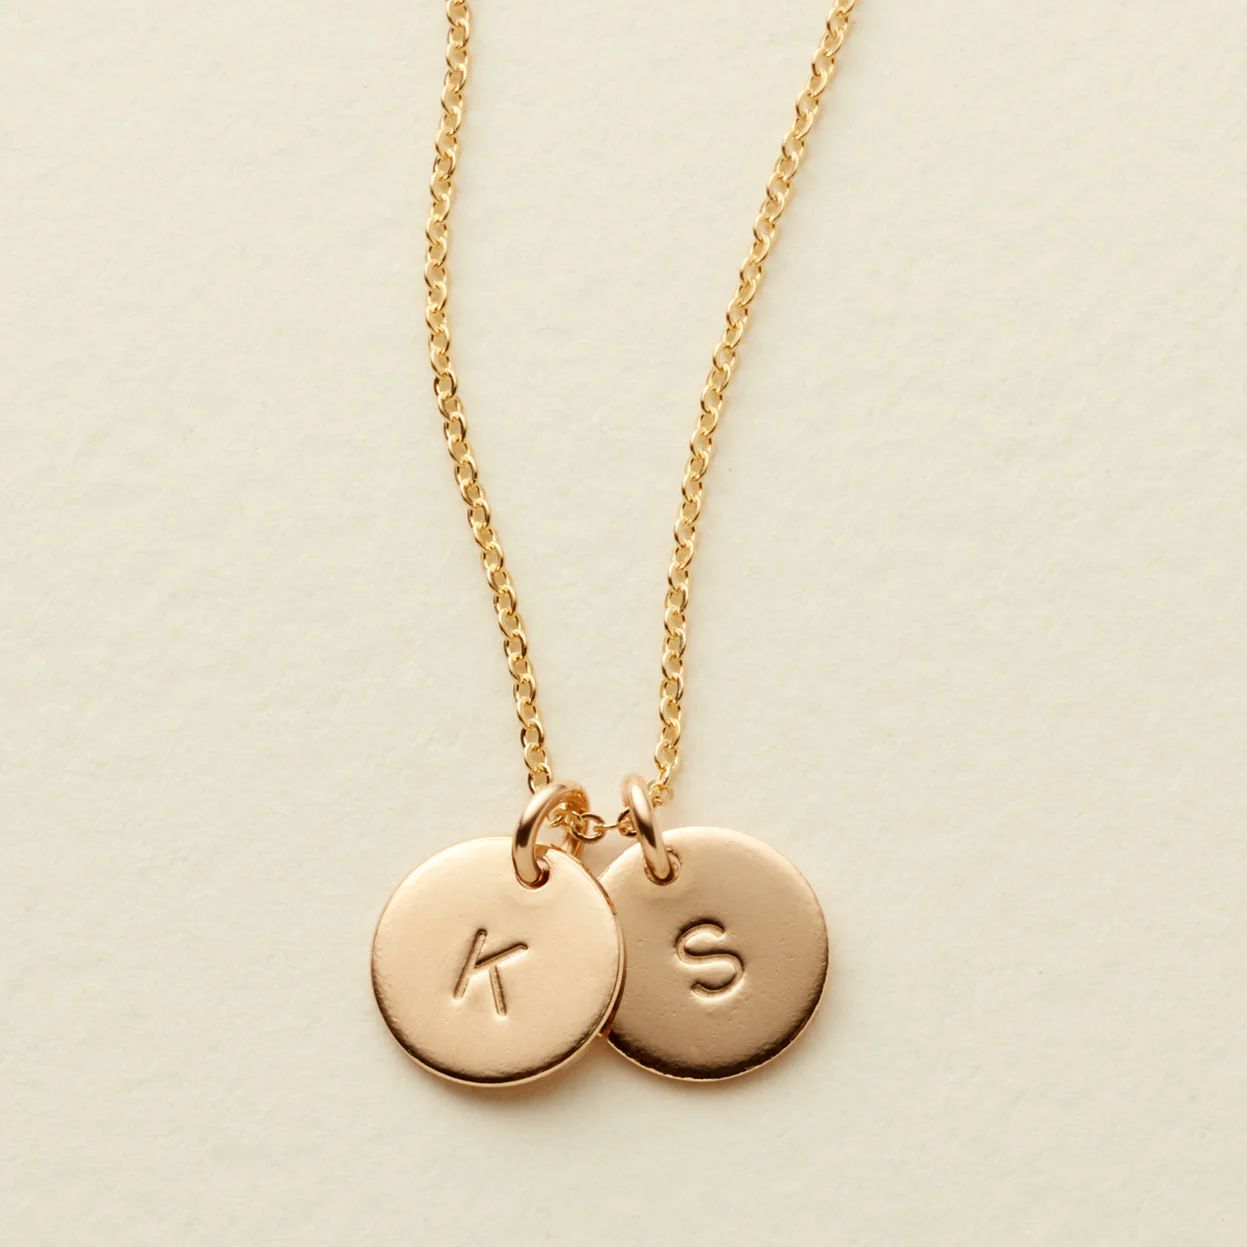 Double Disc Necklace - 3/8" | Made by Mary (US)